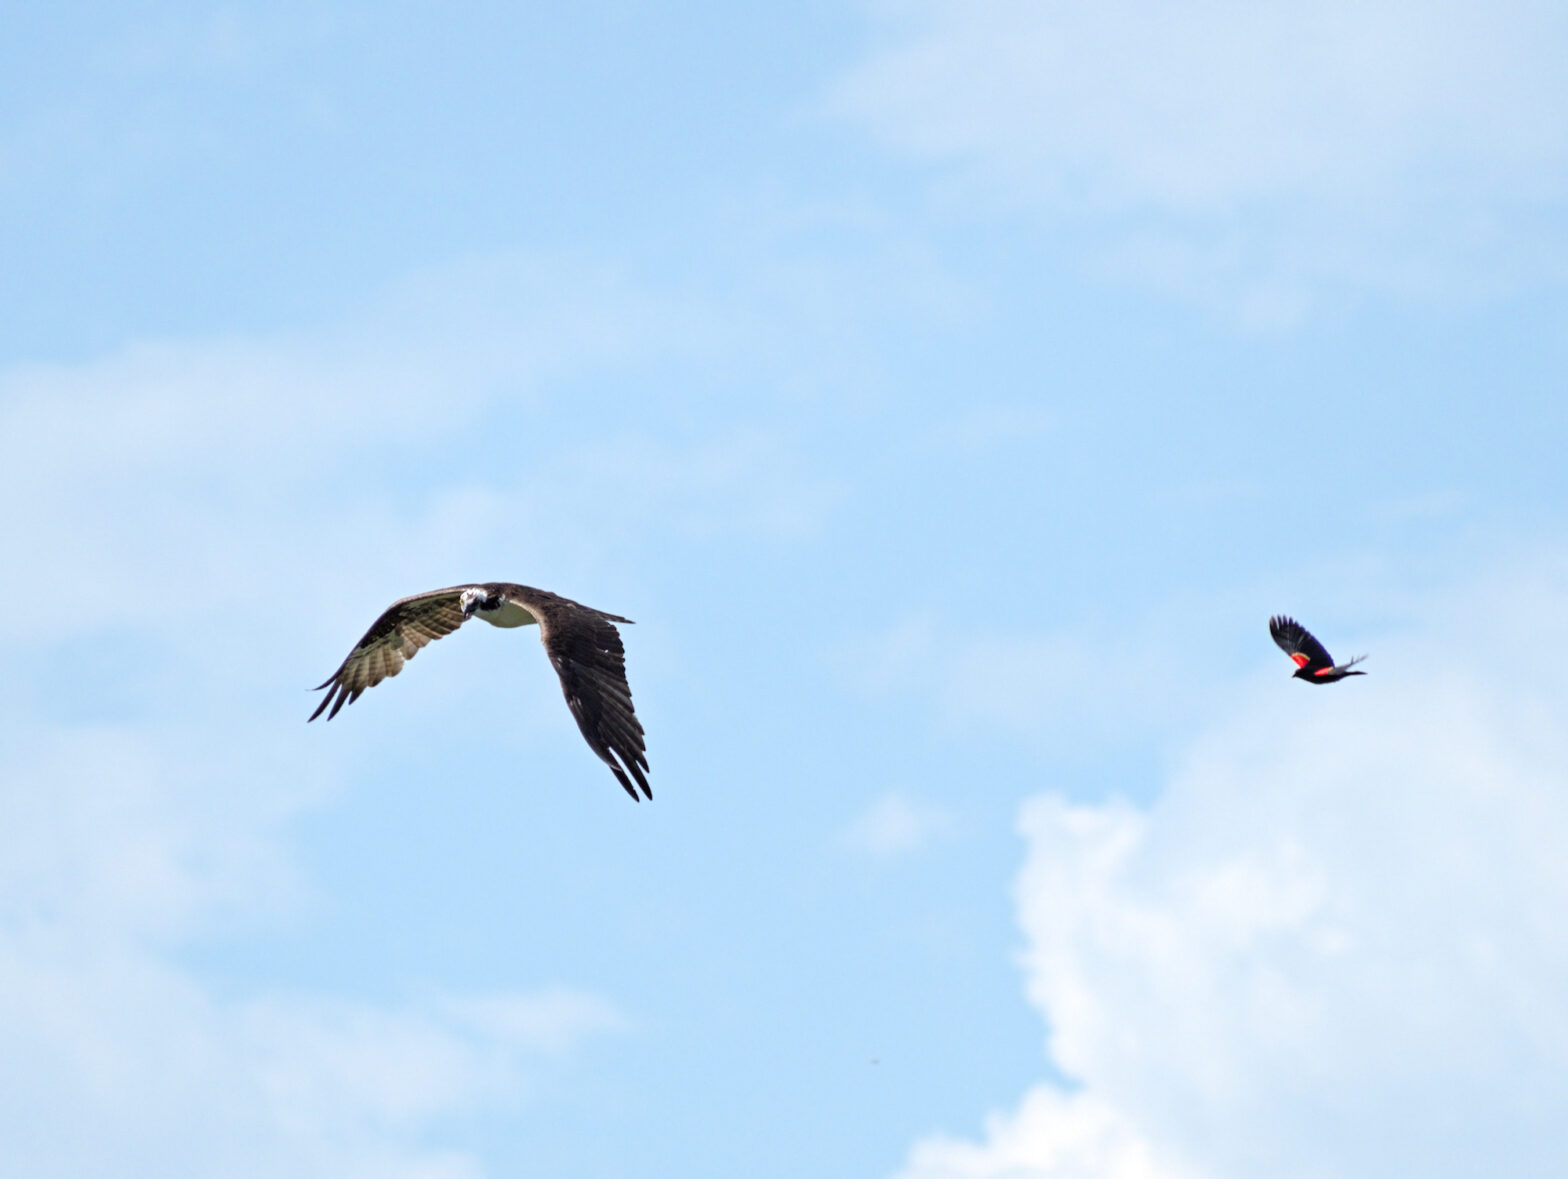 A red-winged blackbird chases an osprey against blue sky and puffy clouds